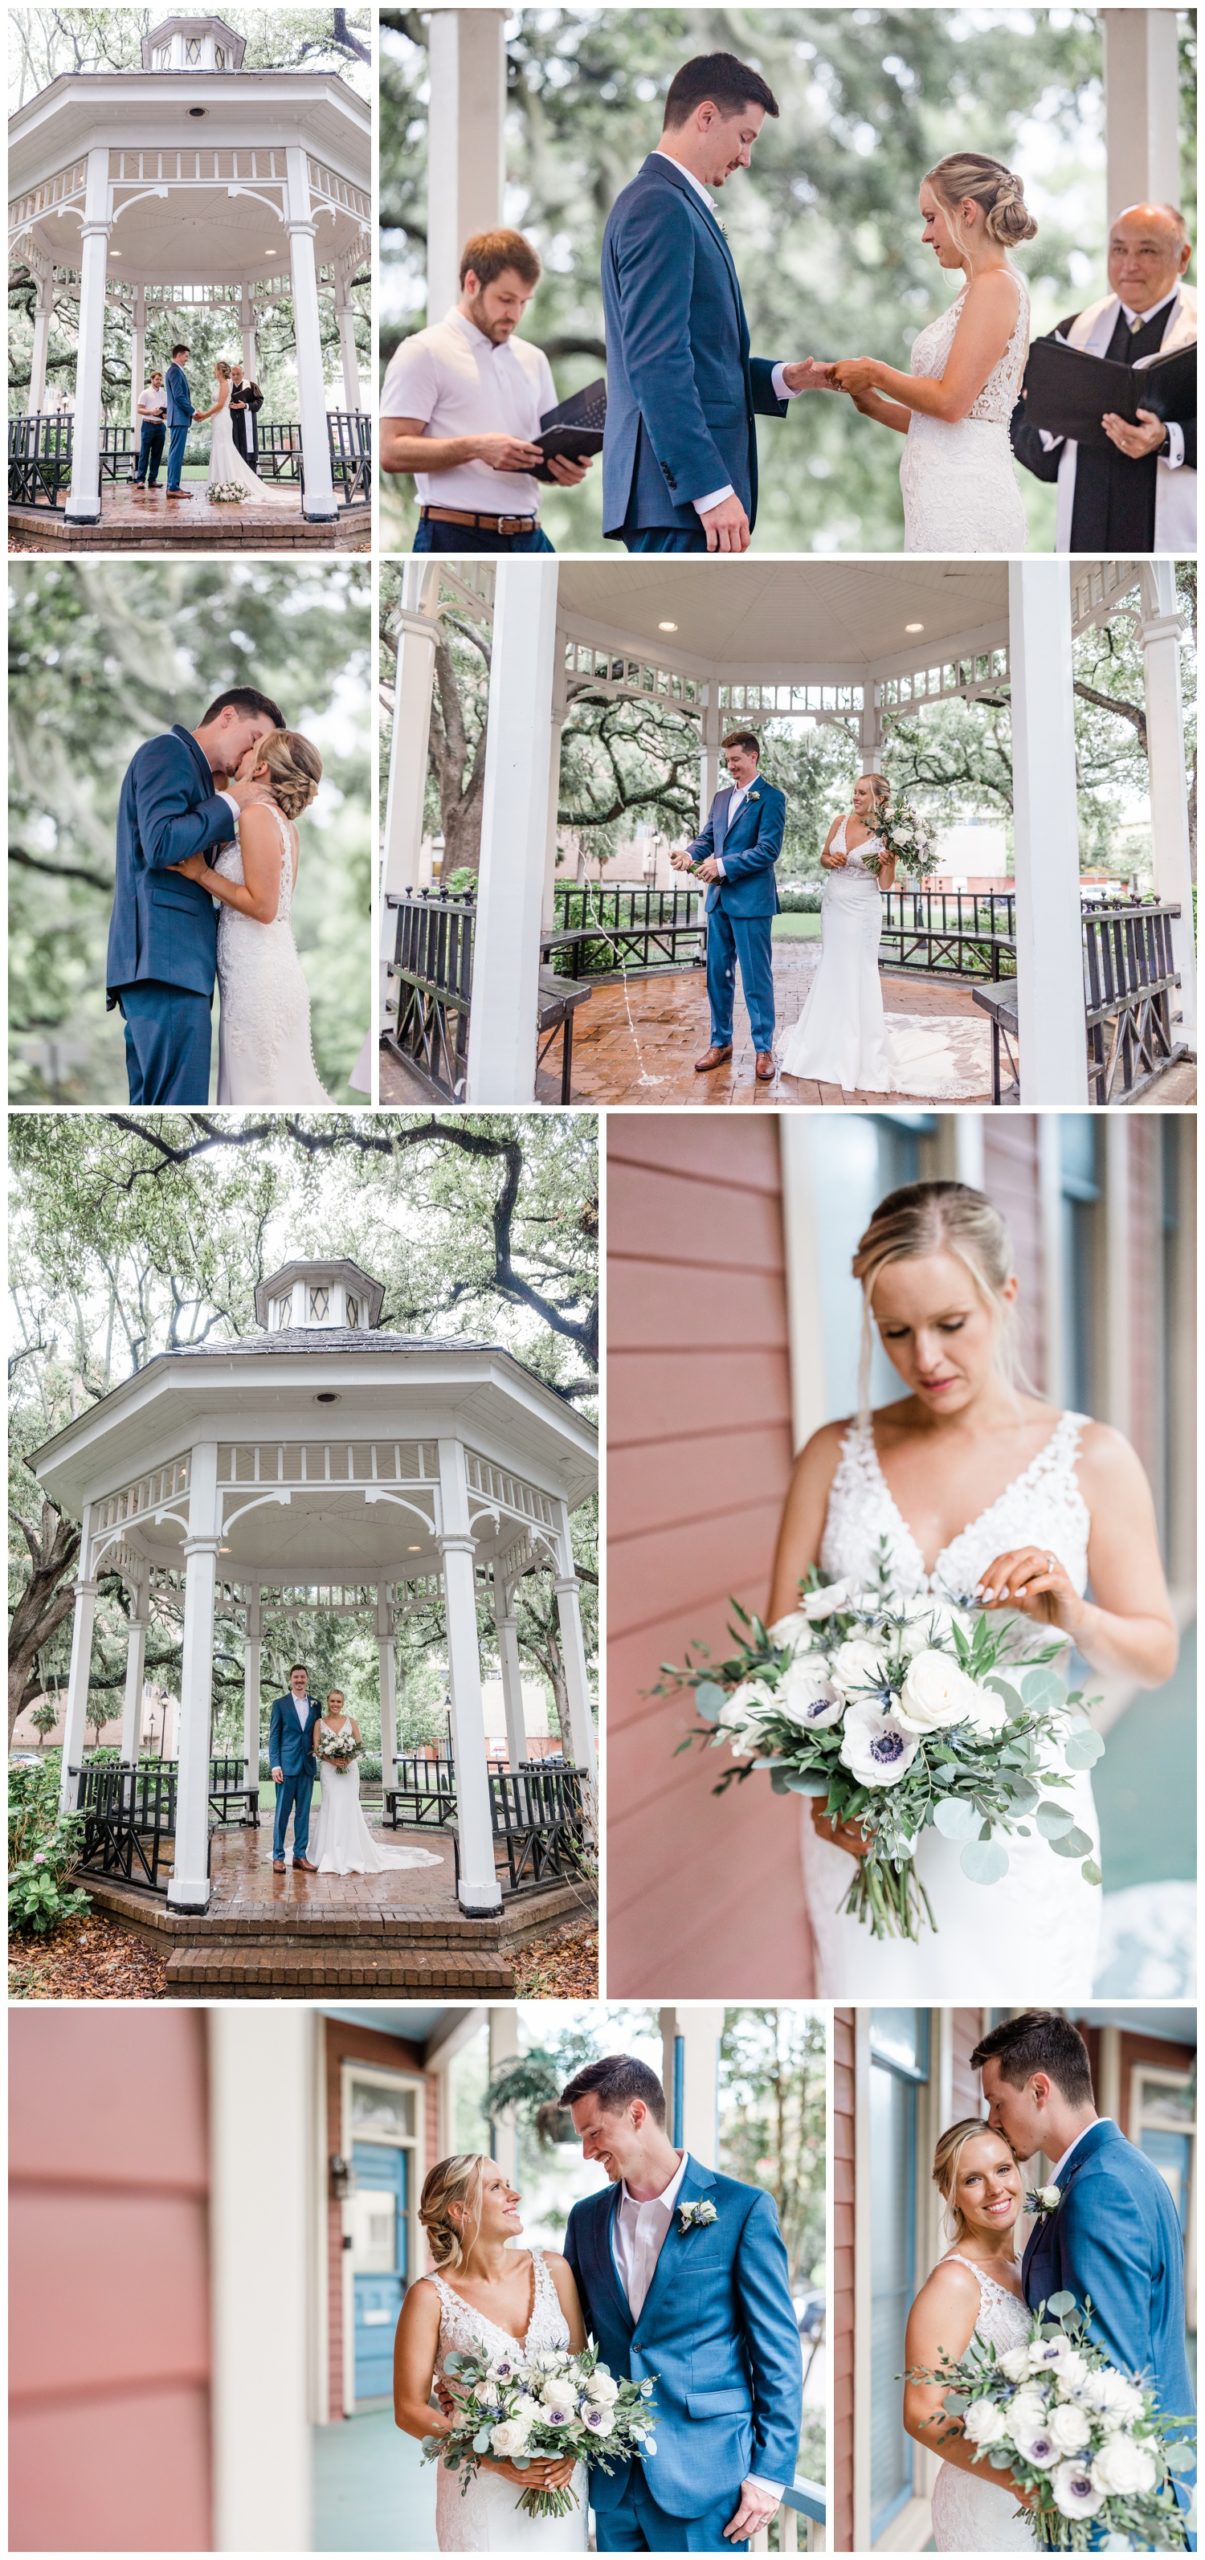 A Dreamy Whitefield Square Elopement - apt b photography, flowers by ivory and beau, make up by royal make up and hair